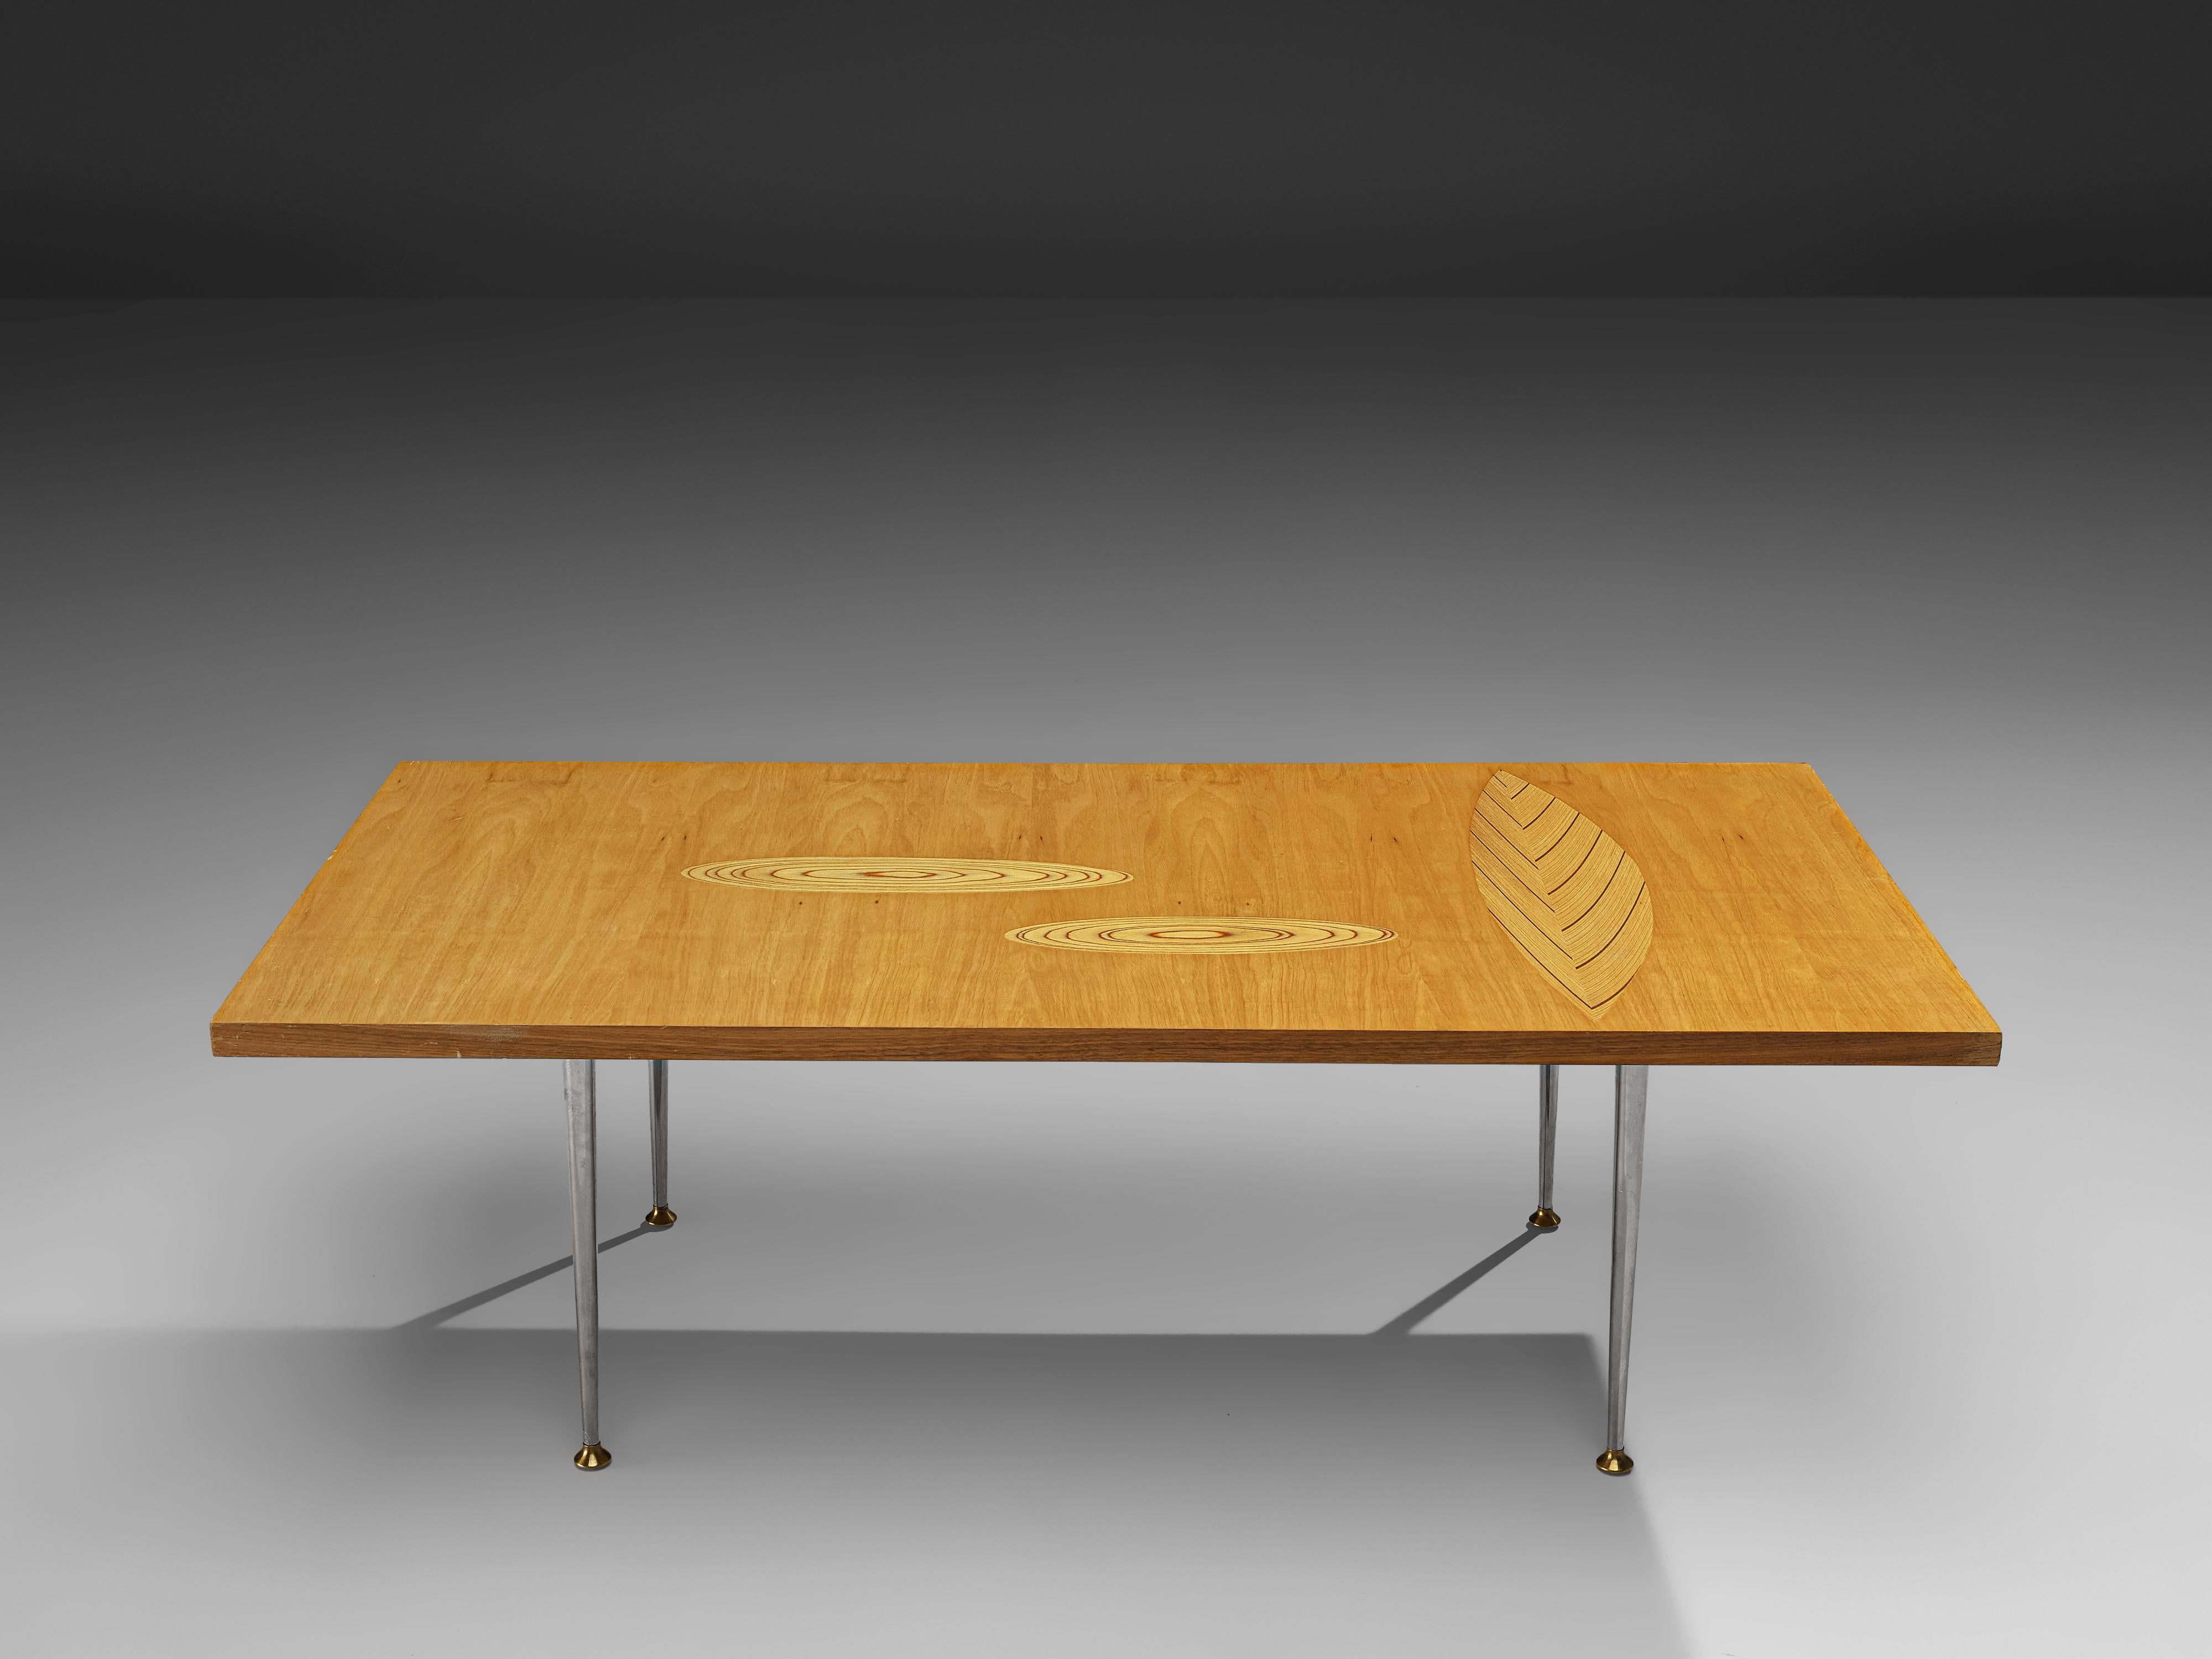 Tapio Wirkkala for Asko, side table, birch, plywood, steel, brass, Finland, 1960s

Coffee table with plywood inlays designed by Tapio Wirkkala, manufactured by Asko. This rectangular coffee table is one of Wirkkala's iconic furniture designs.